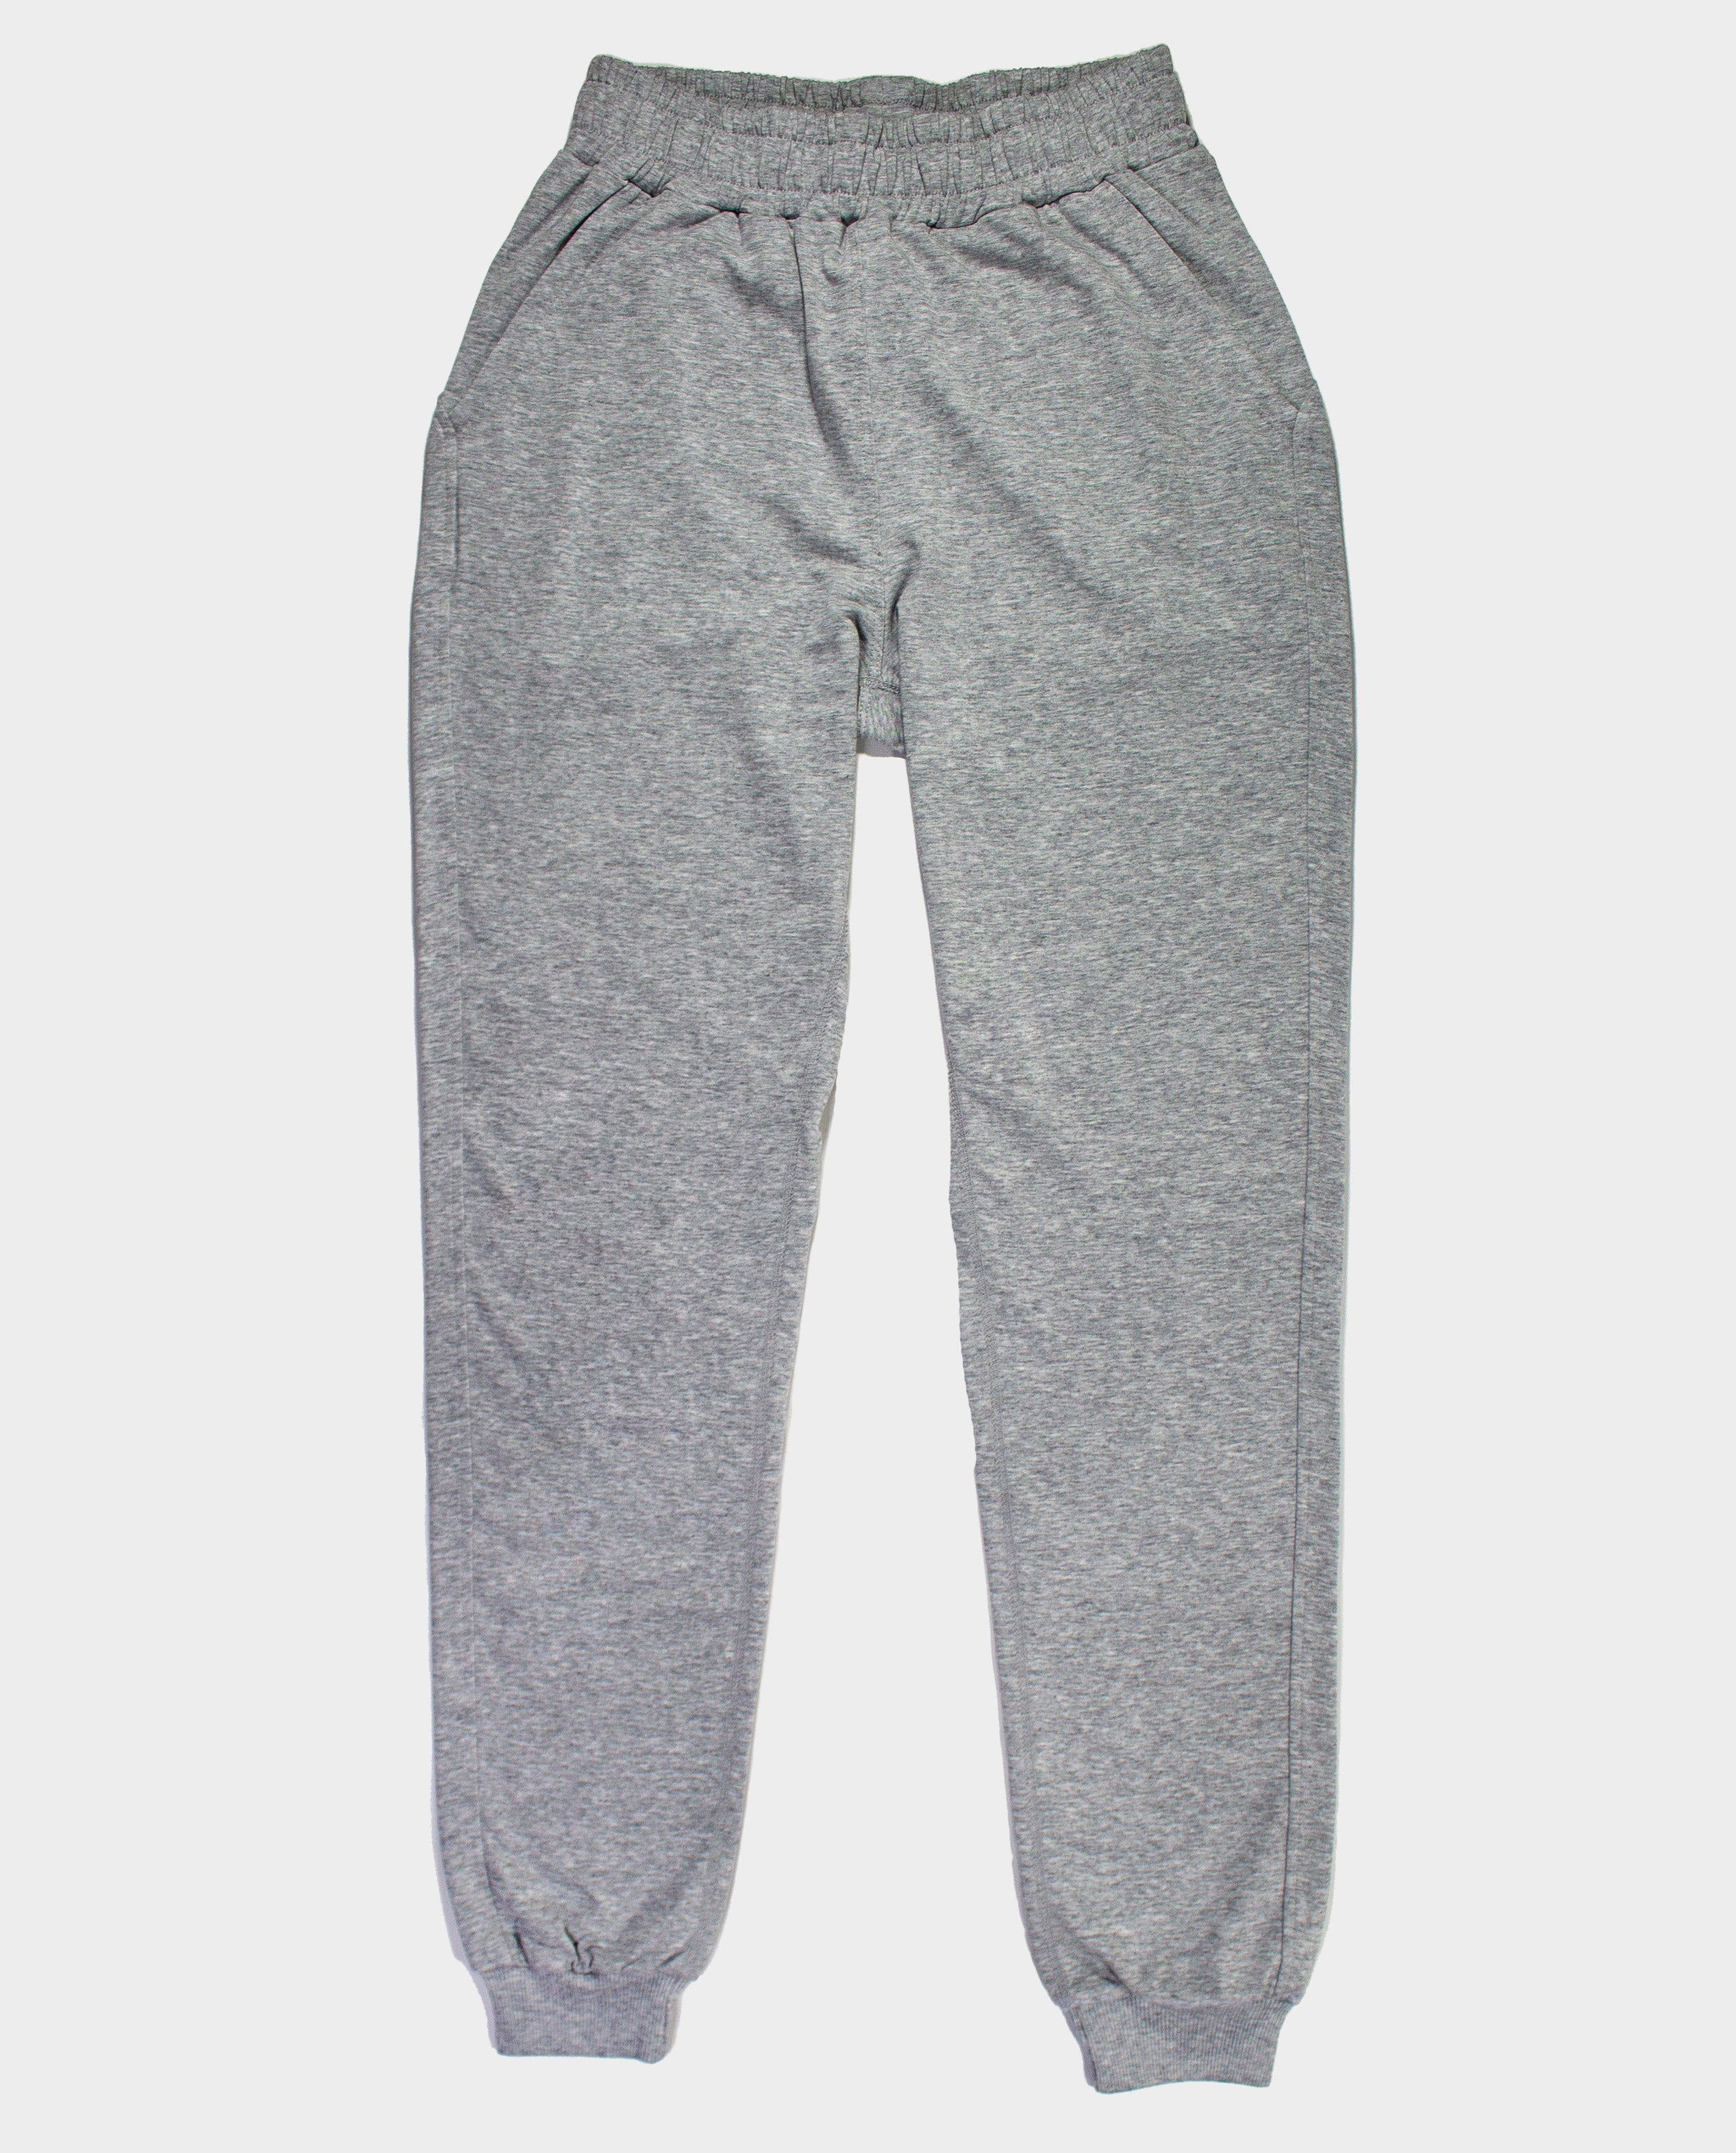 The High-Rise Sweatpant in Heather Grey | FRANC Sustainable Clothing